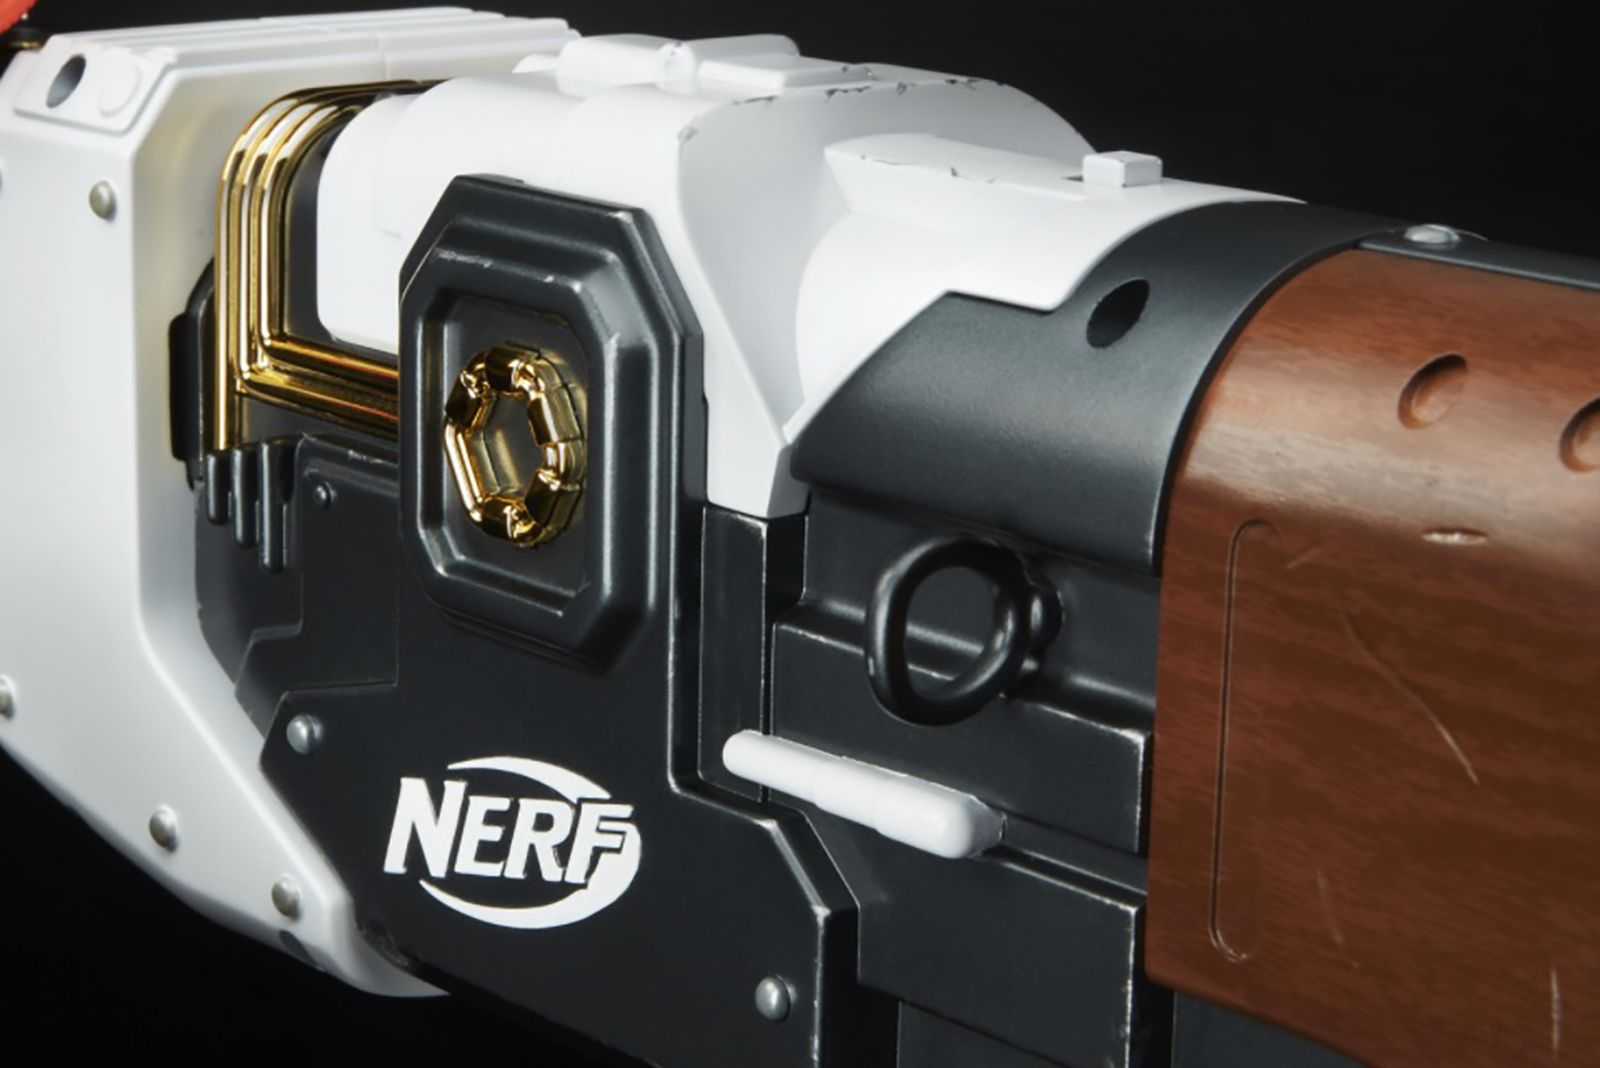 The Mandalorian’s unique rifle is Nerf’s latest foam-firing Star Wars toy photo 2